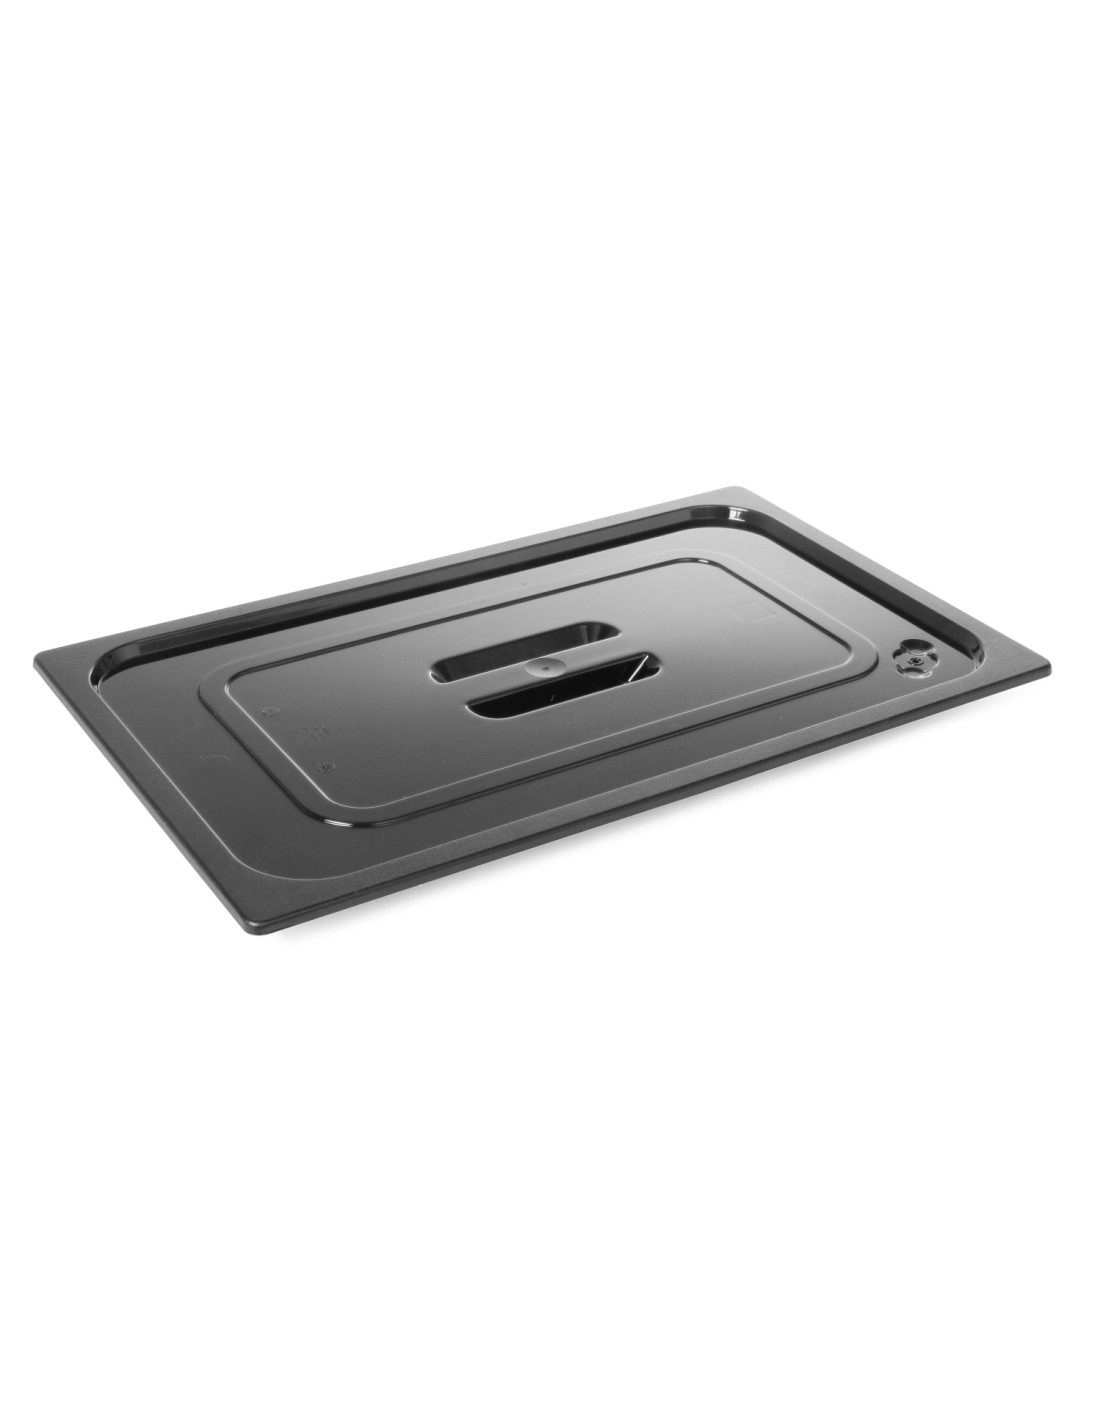 Lid for GN 1/3 trays - In black polycarbonate - mm 325 x 176